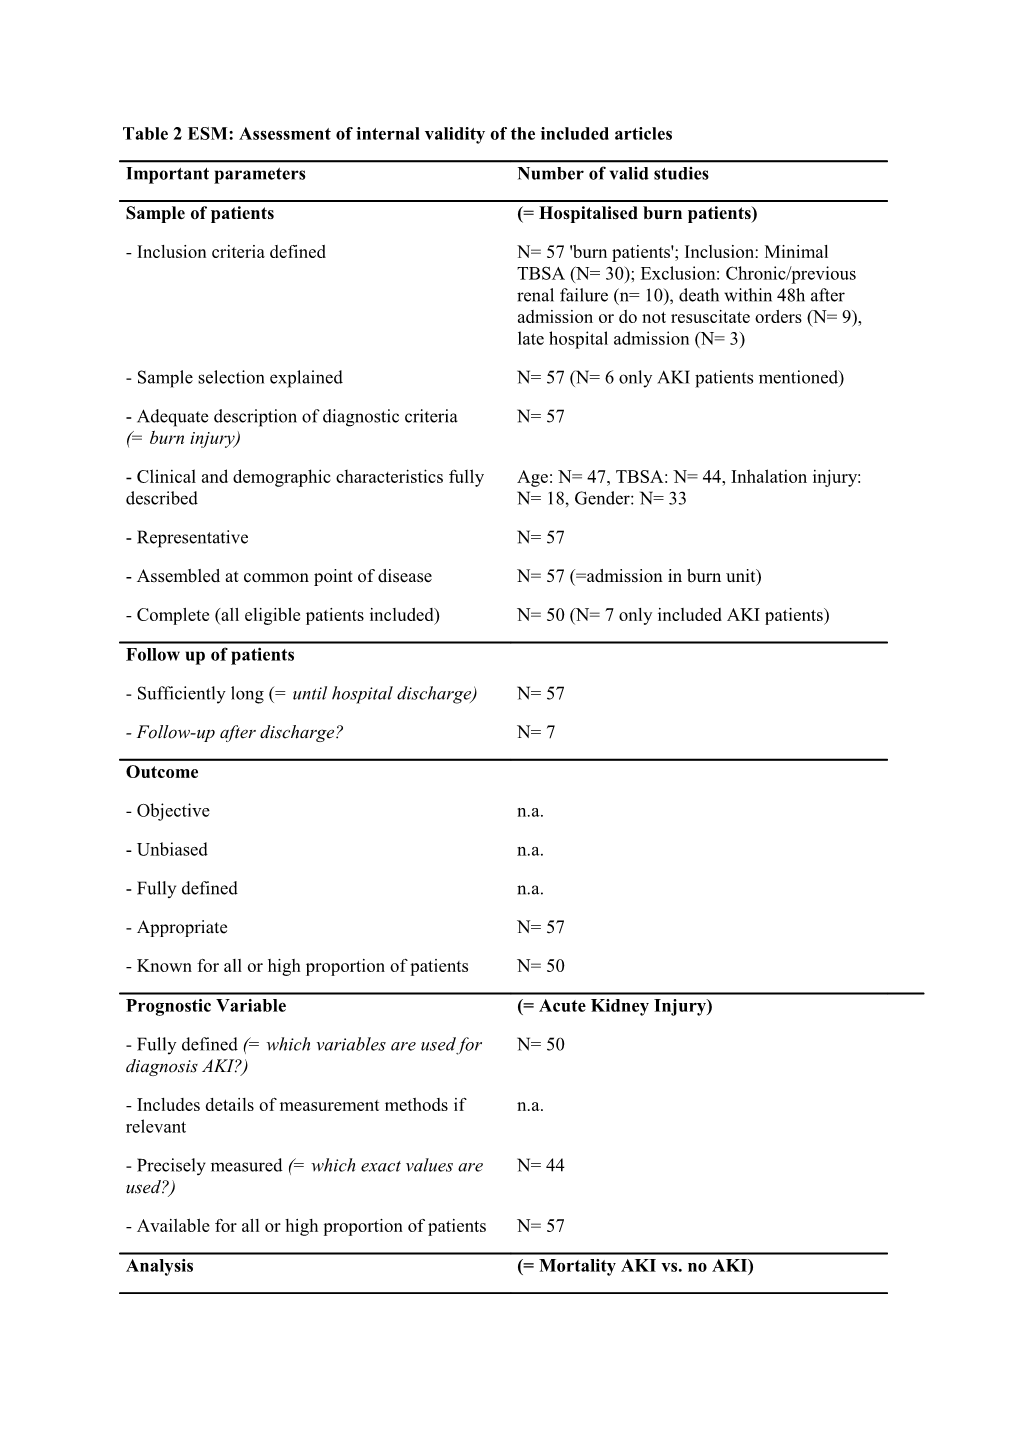 Table 2 ESM: Assessment of Internal Validity of the Included Articles